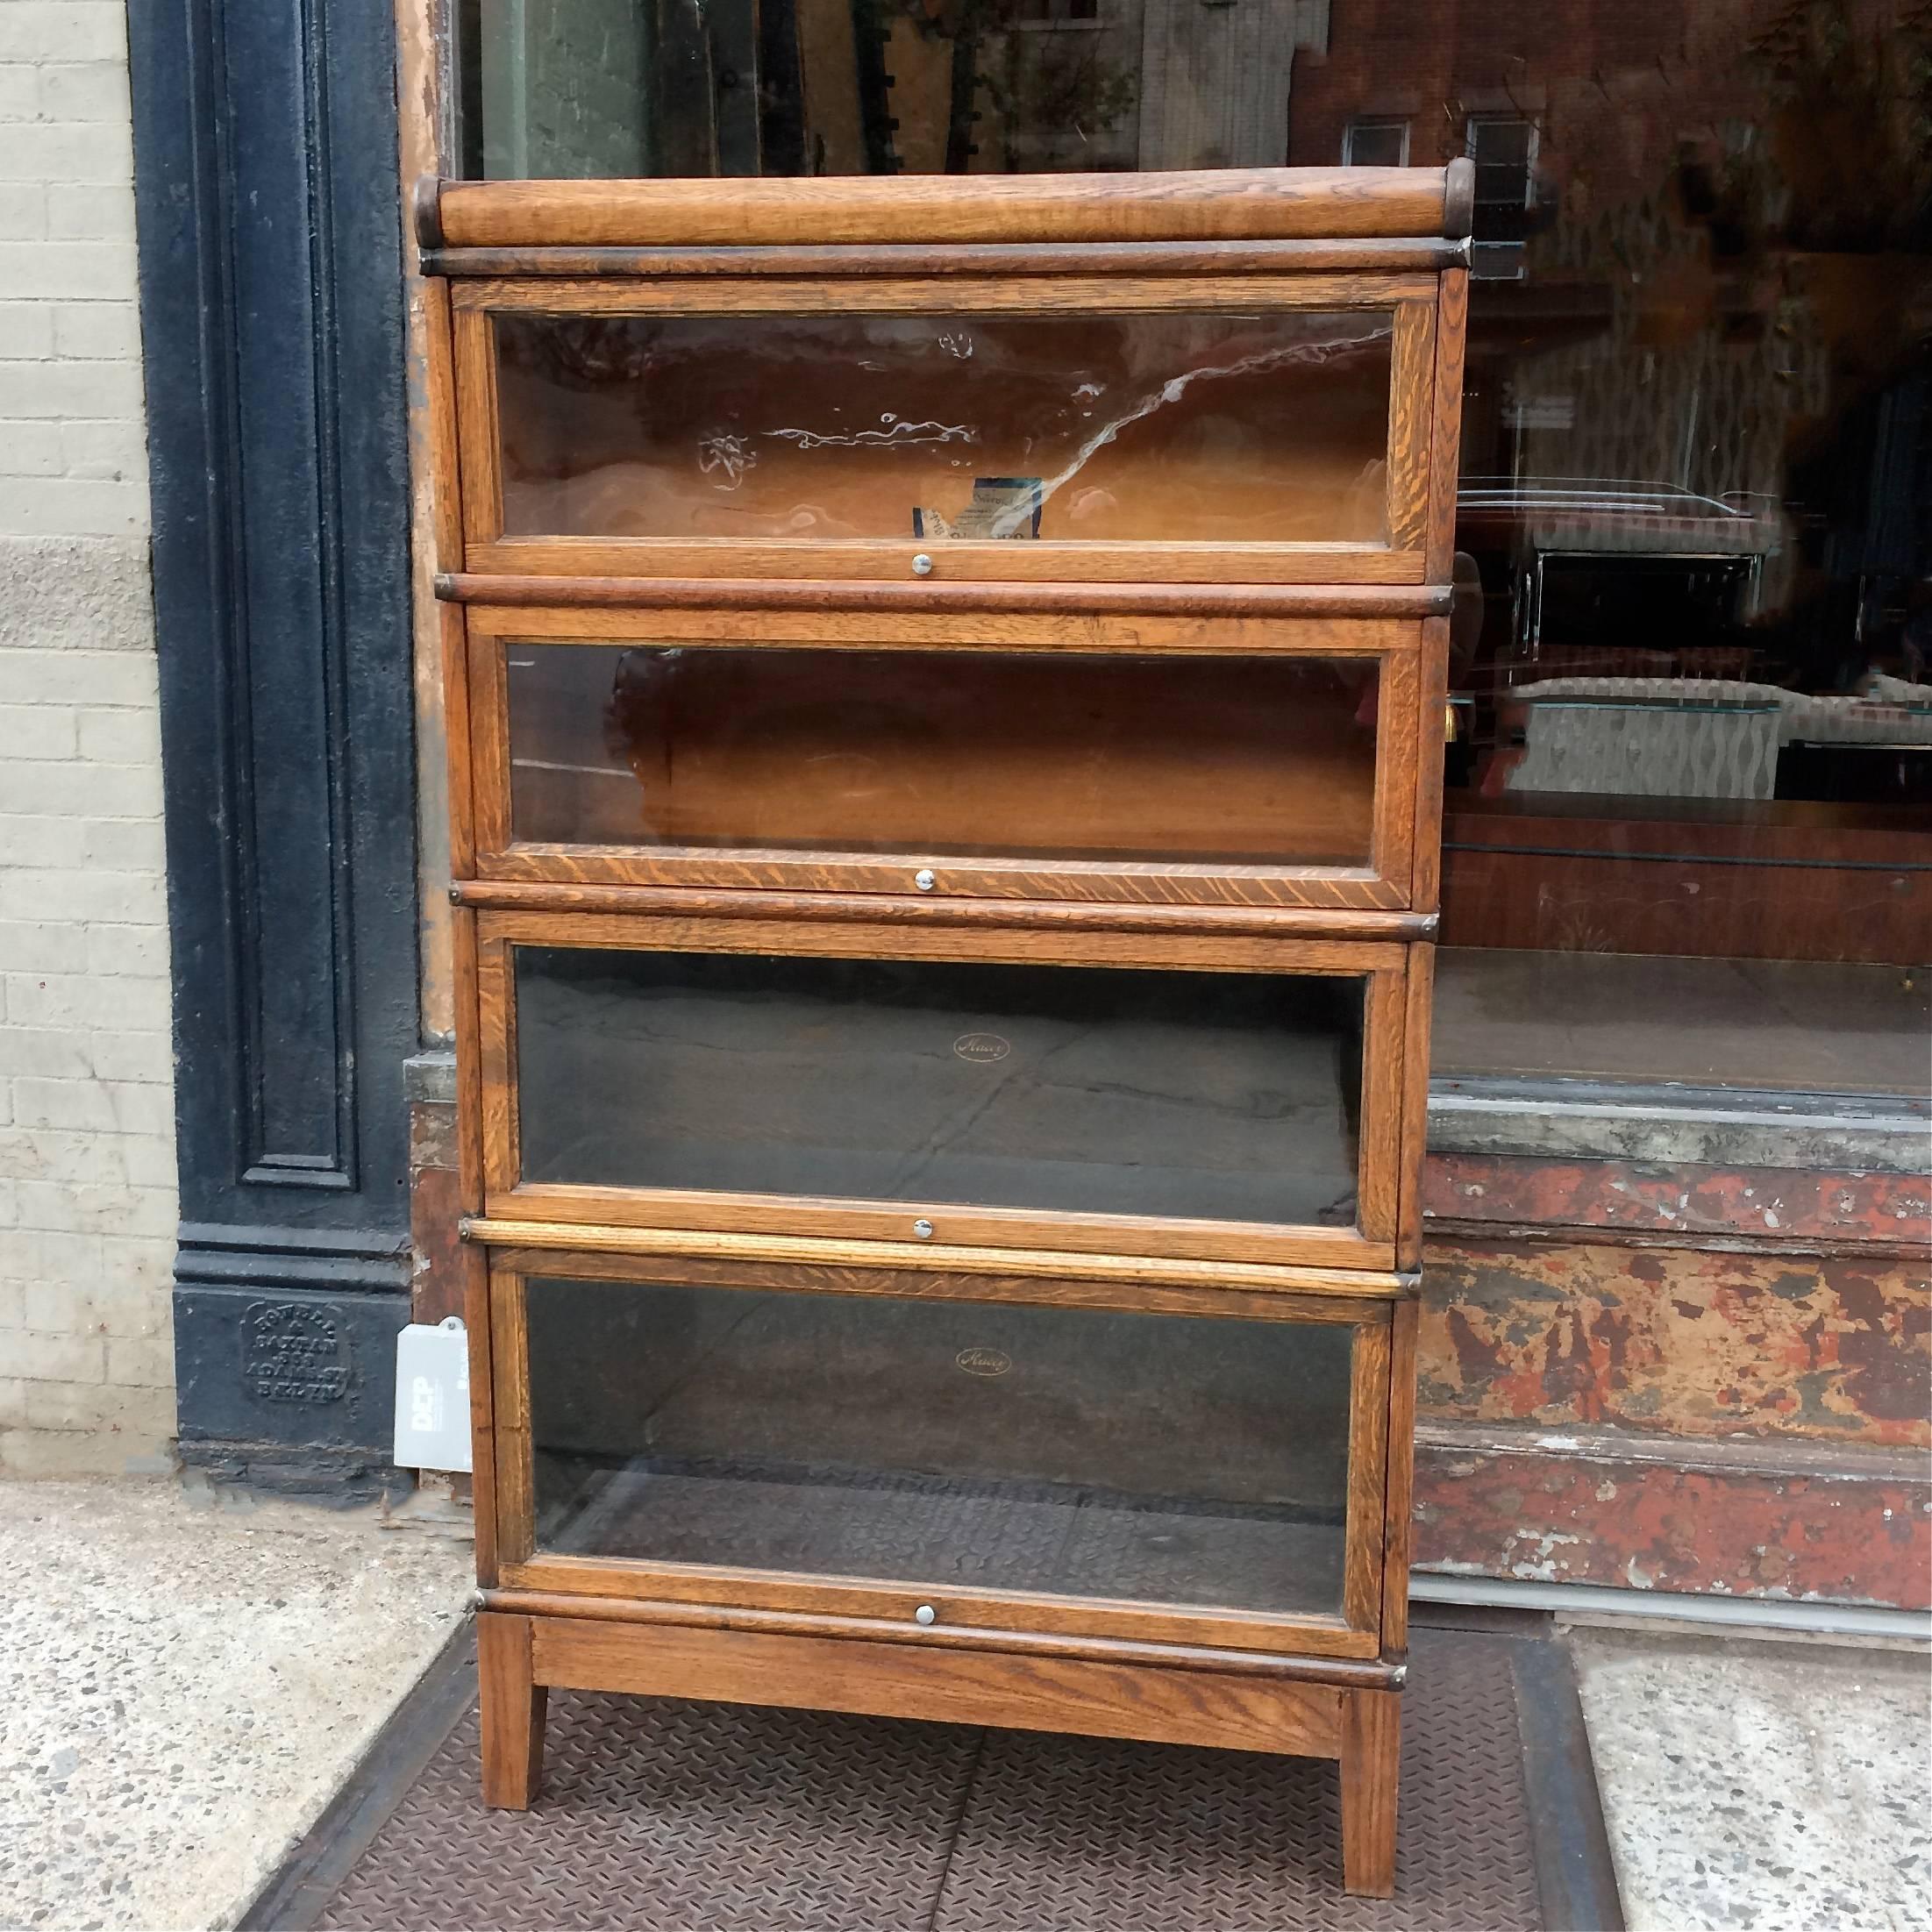 Early 20th century, four-stack, sectional bookcase, barrister case by The Globe Wernicke Co. is interlocking stacks of oak with glass fronts and steel scissor hinges, circa 1920s.

Macey stickers are from manufacturer The Macey Co. which merged